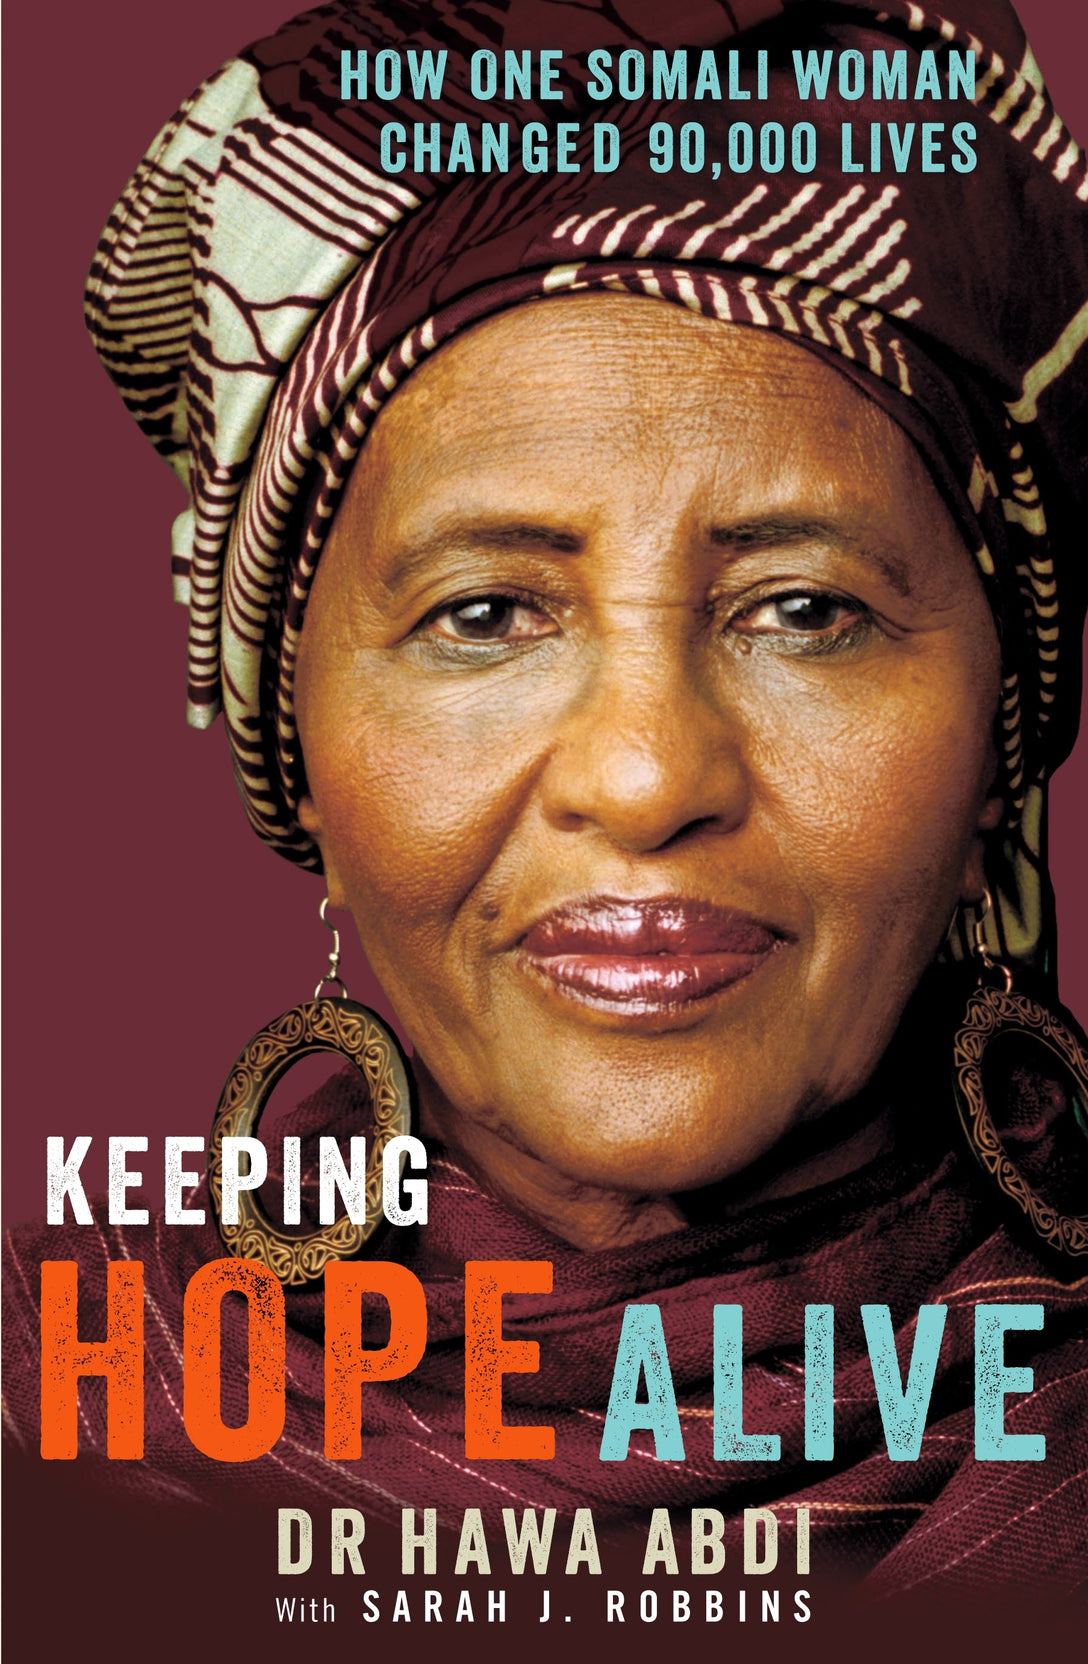 Keeping Hope Alive by Hawa Abdi